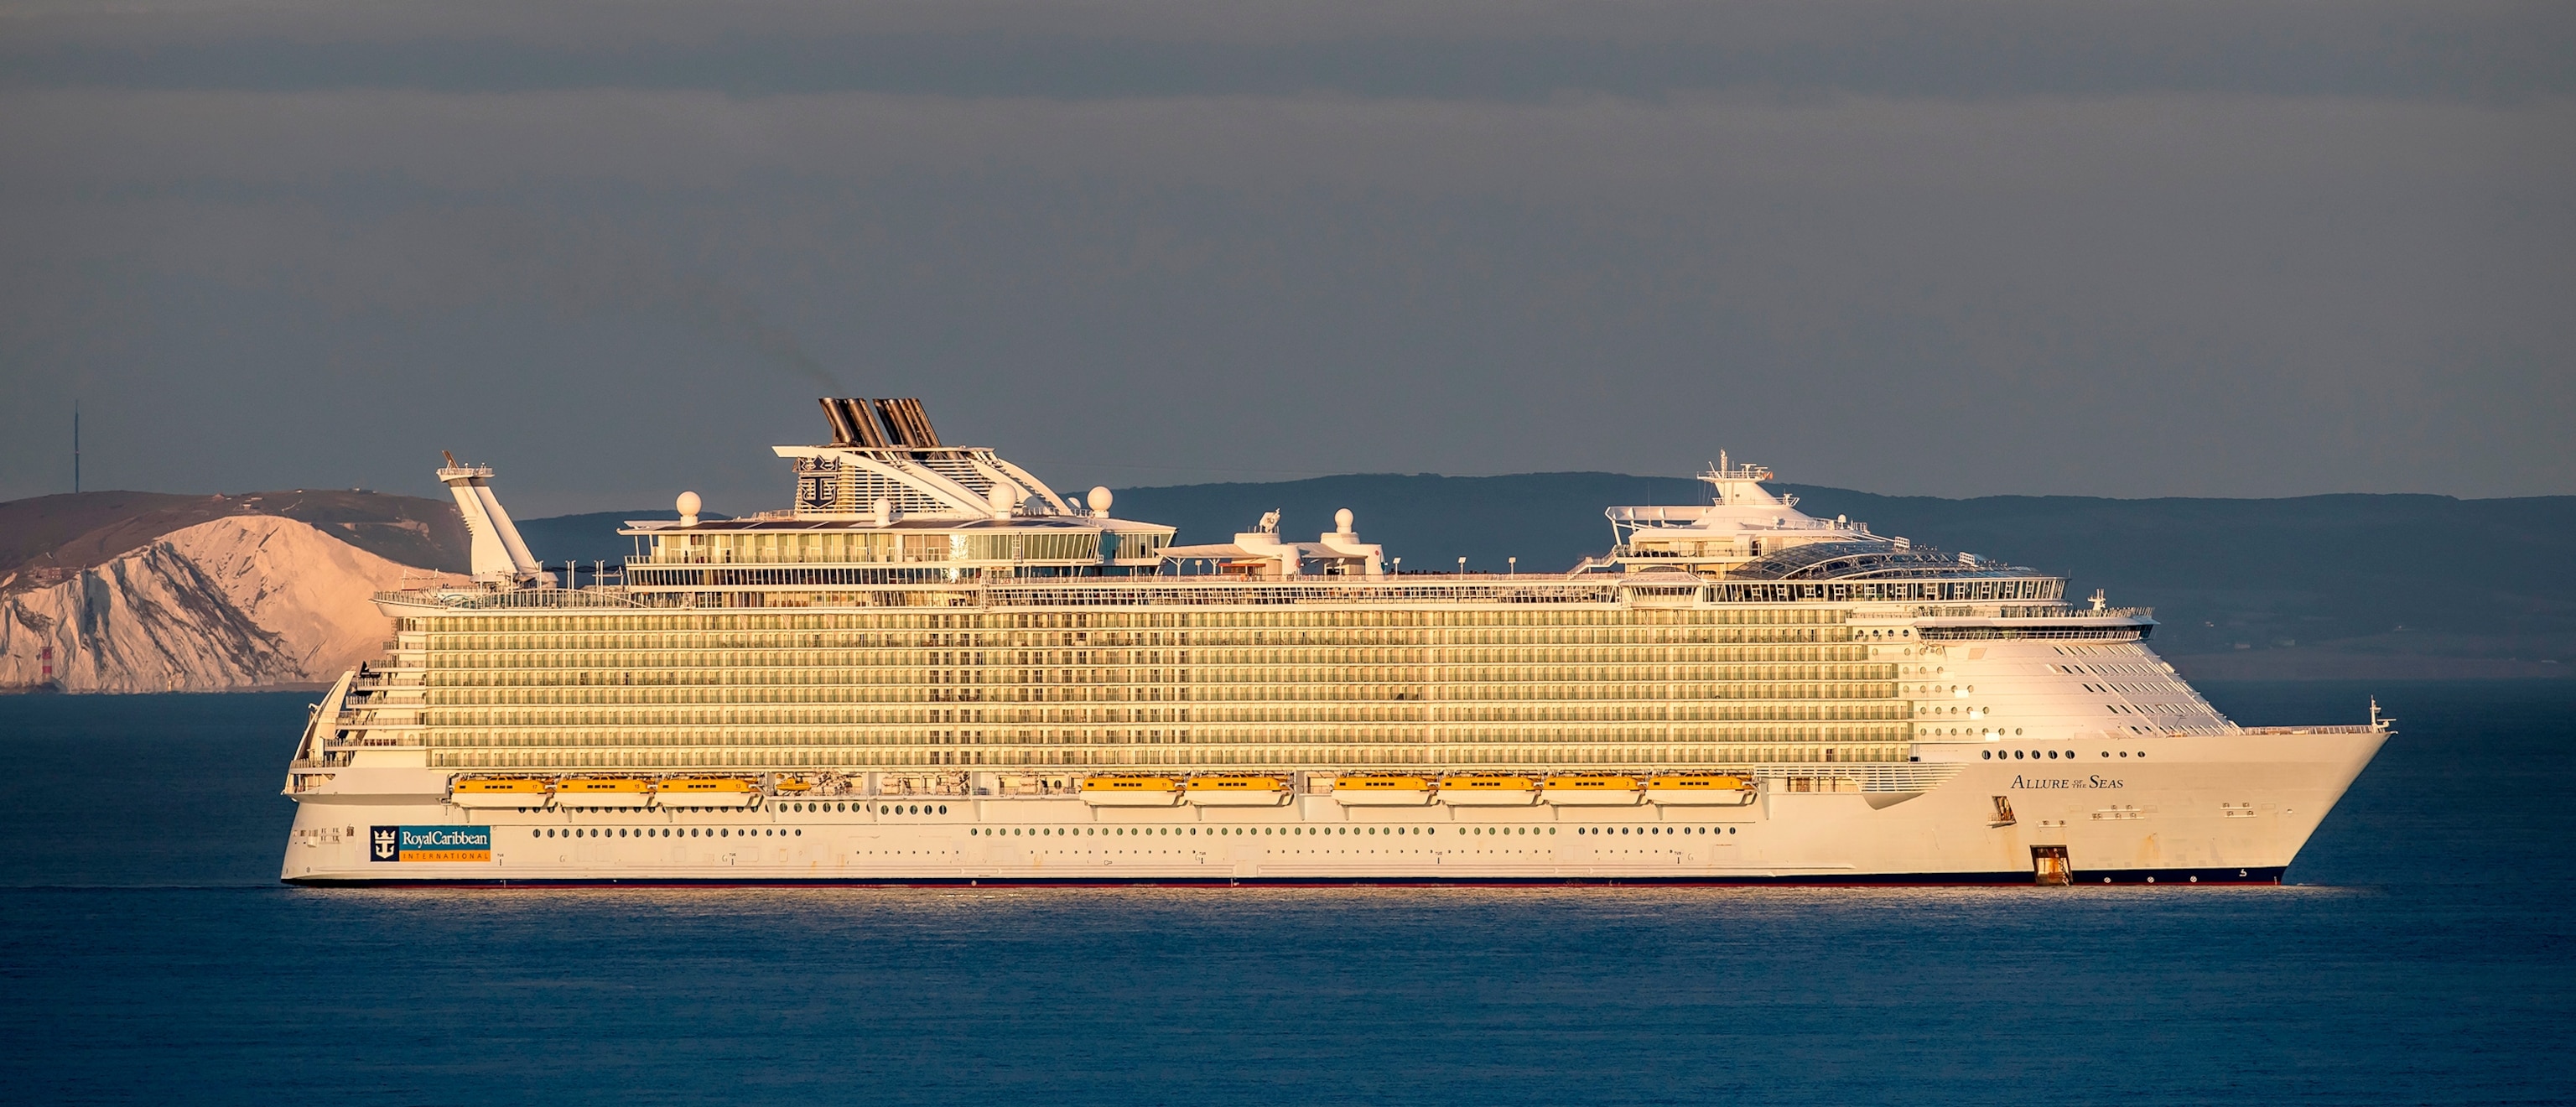 PHOTO: In this Aug. 31, 2020, file photo, the Allure of the Seas cruise ship is shown off Studland, Dorset, England.